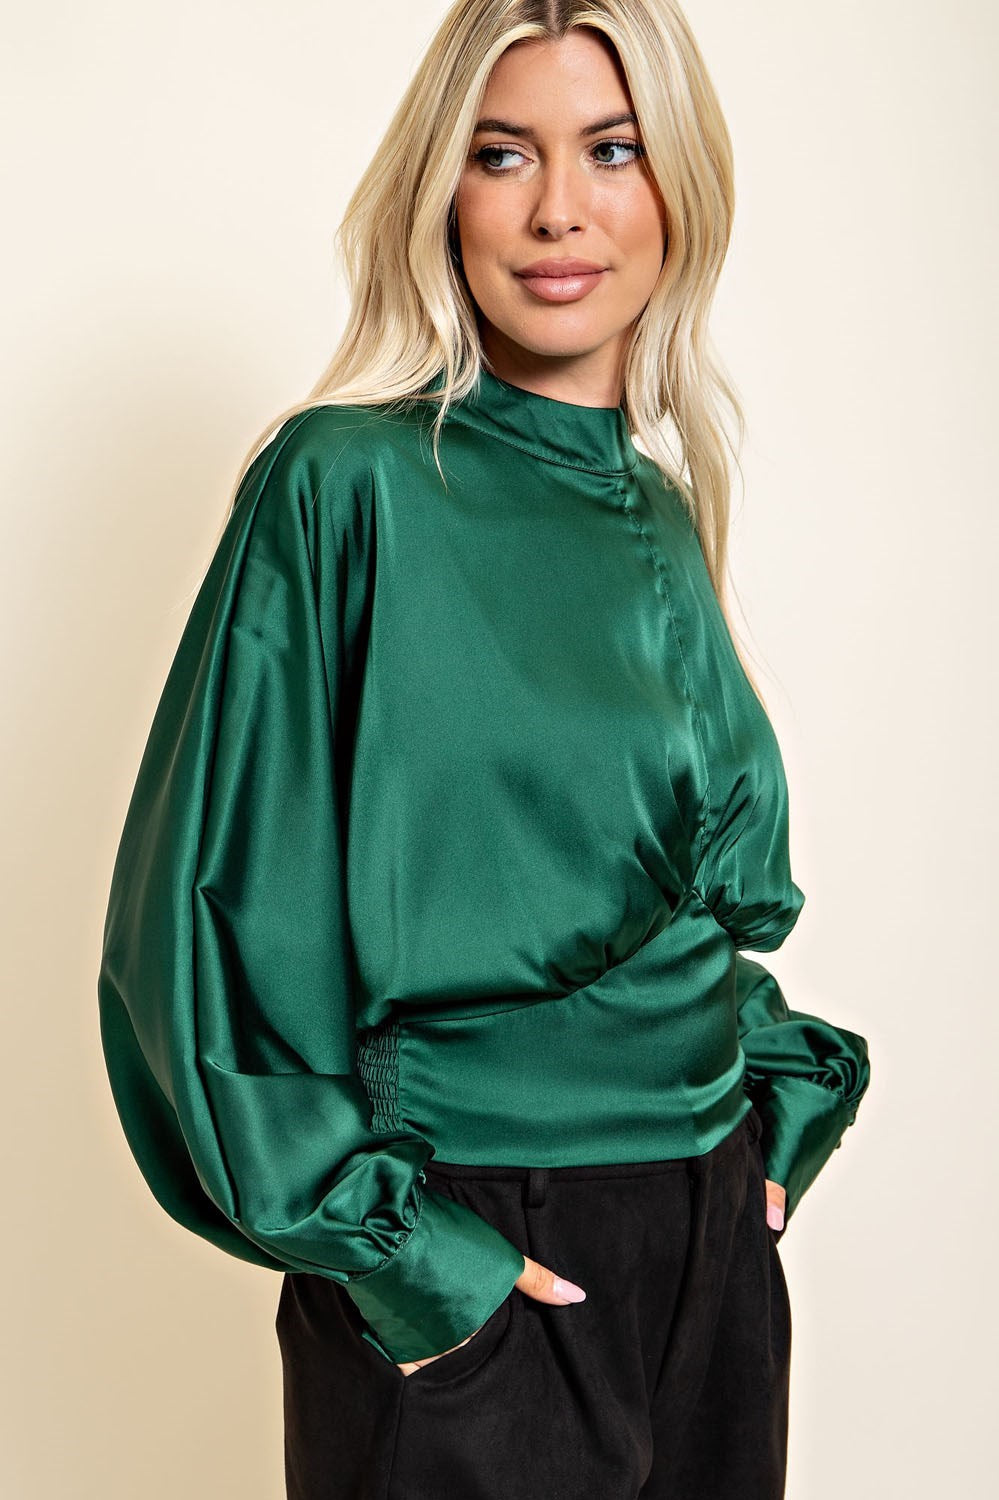 Hunter Green High Collar Balloon Sleeve Top with Button Closure in the Back.